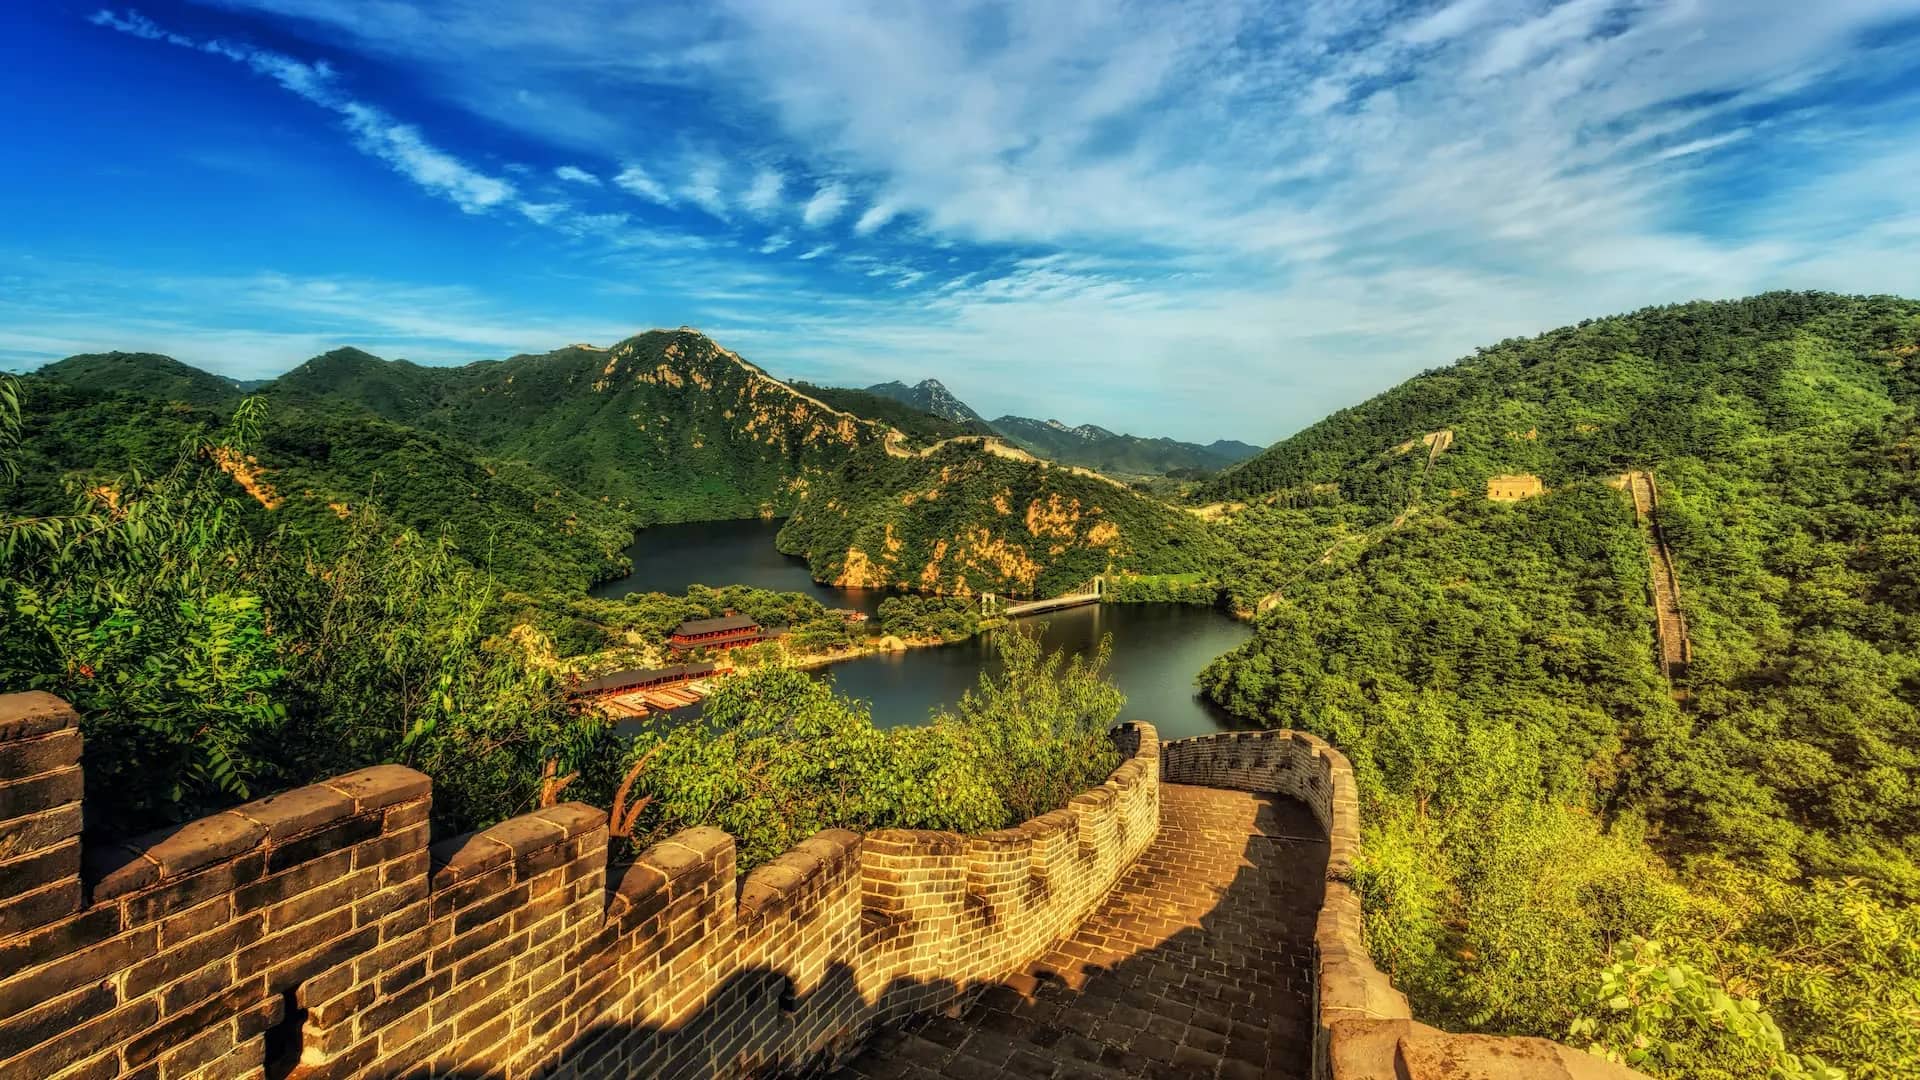 The Great Wall of China is probably one of the most recognizable fences in the world.